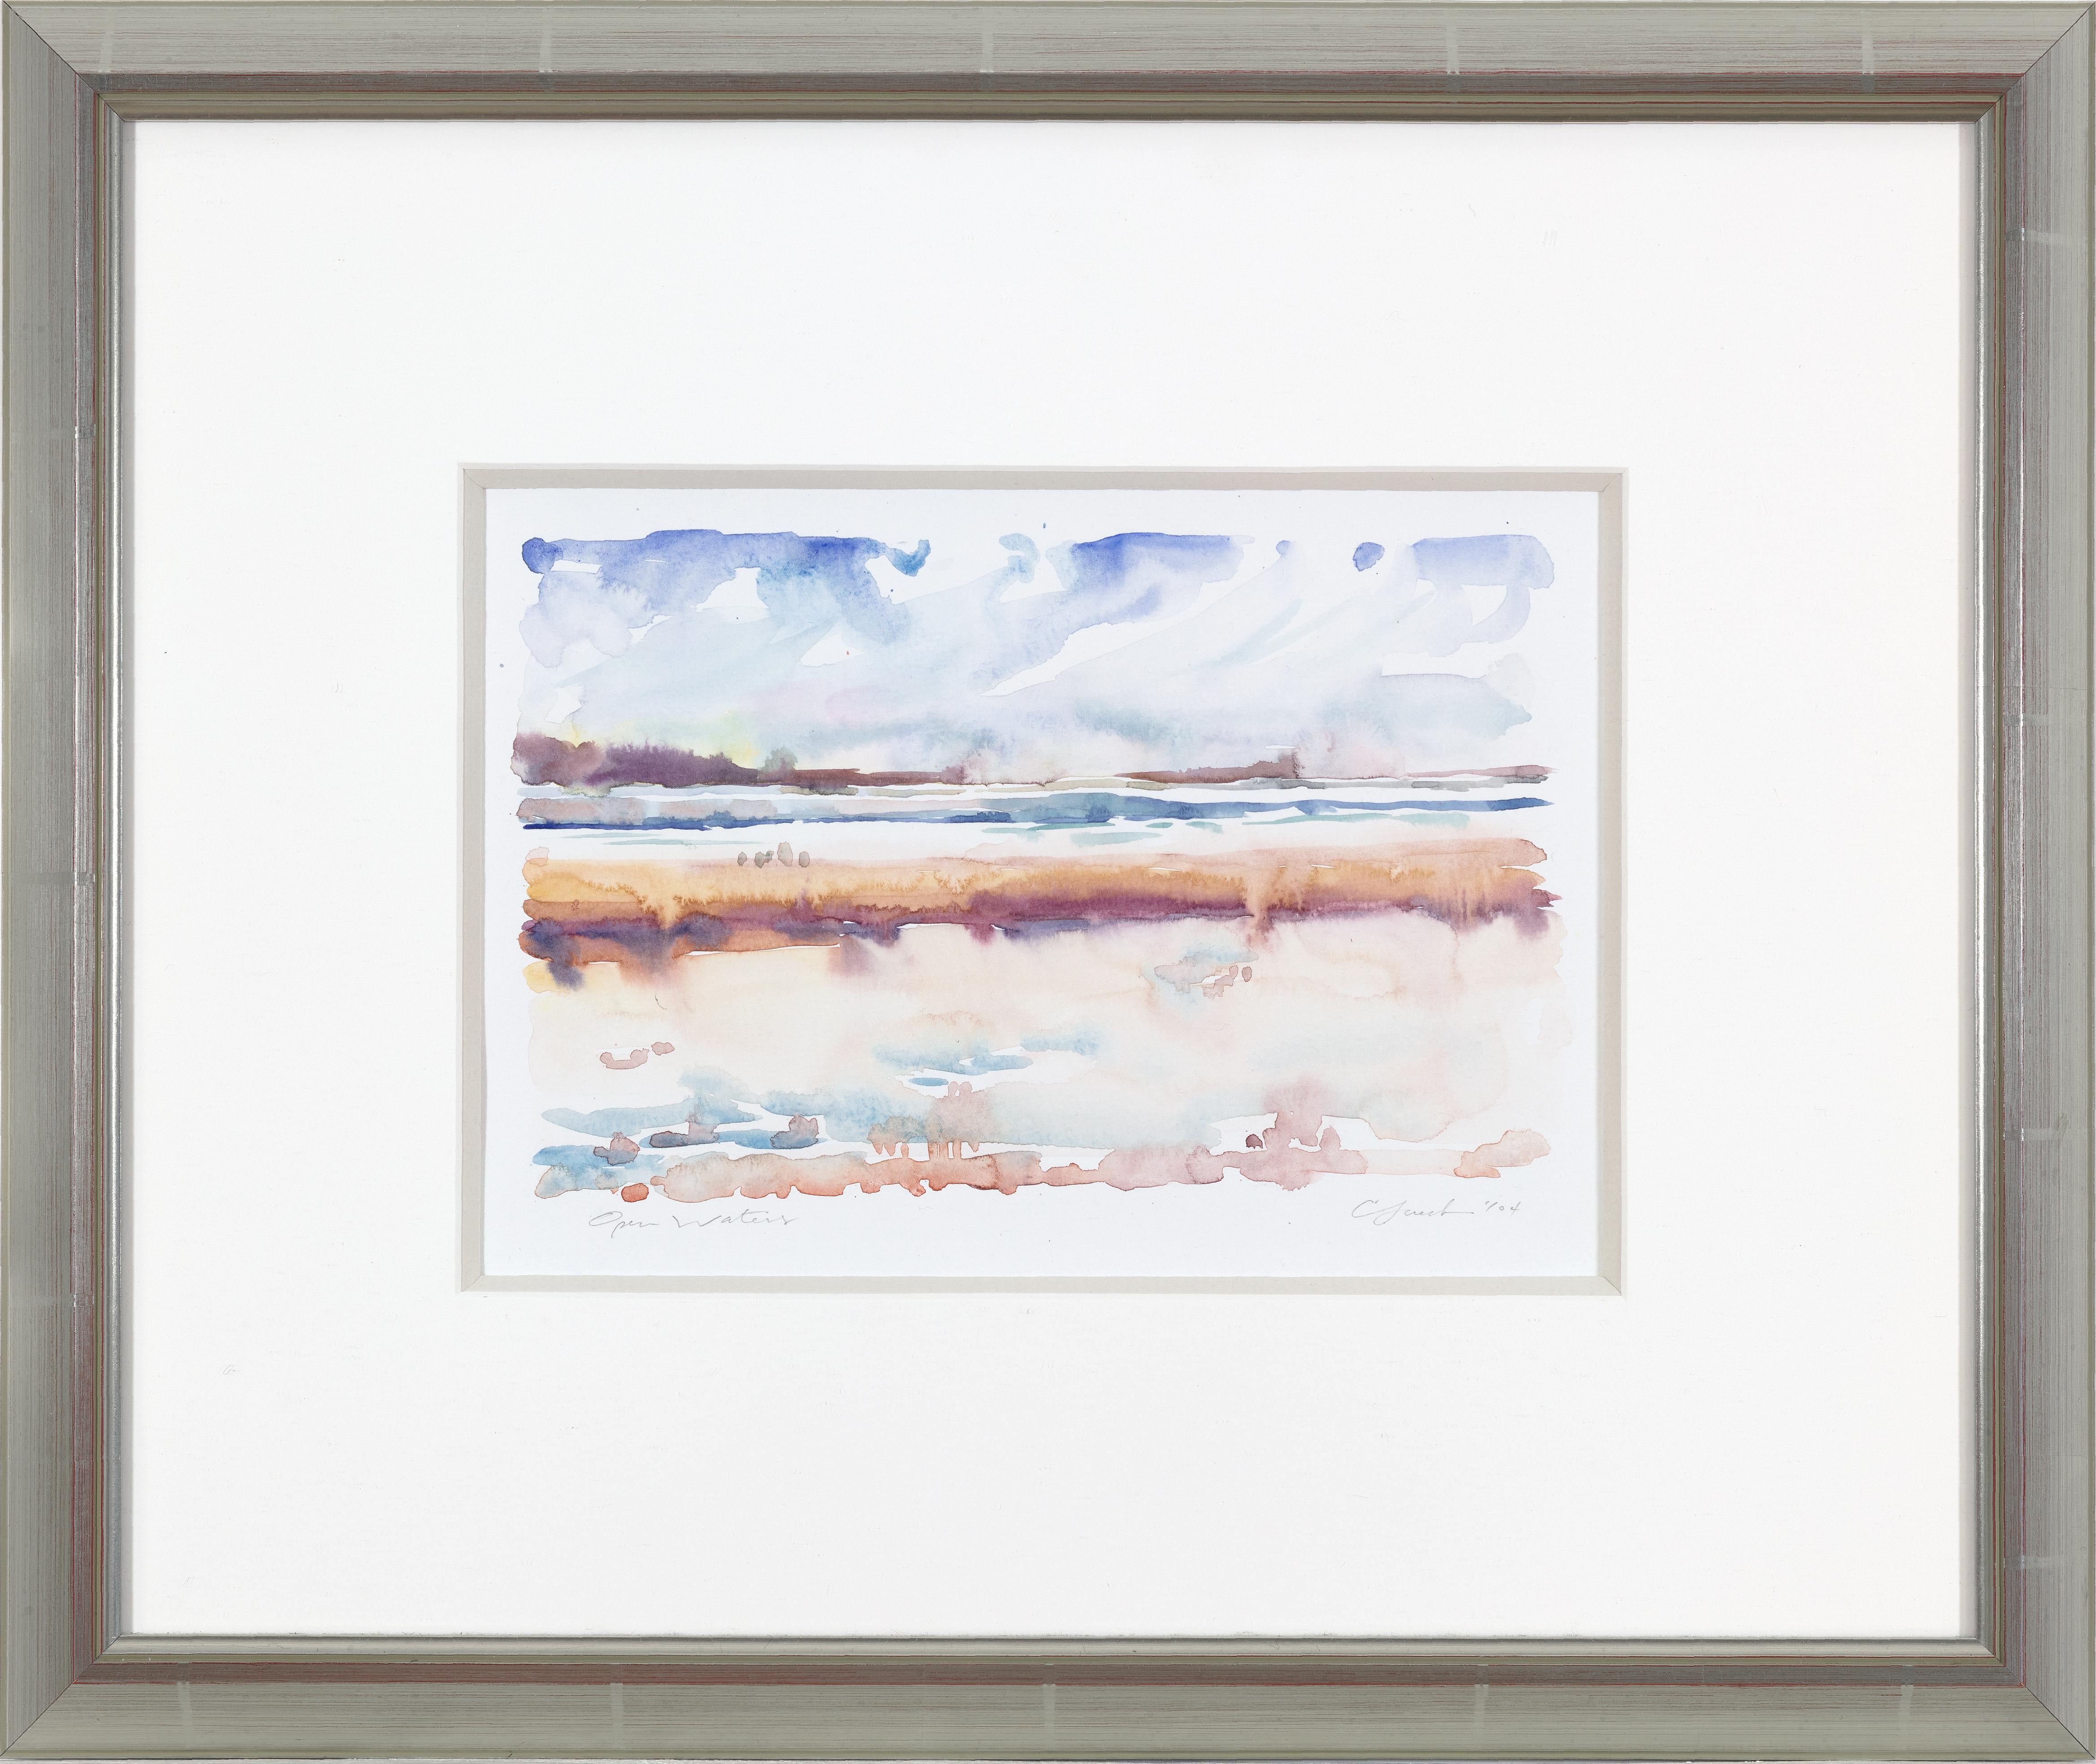 'Open Waters' is an original watercolor on Holbein watercolor paper by Craig Lueck. These petite watercolors that shape Lueck's portfolio serve as windows into the artist's world.

5 1/2" x 8" art
13 3/4" x 16 3/8" frame
Signed and dated lower